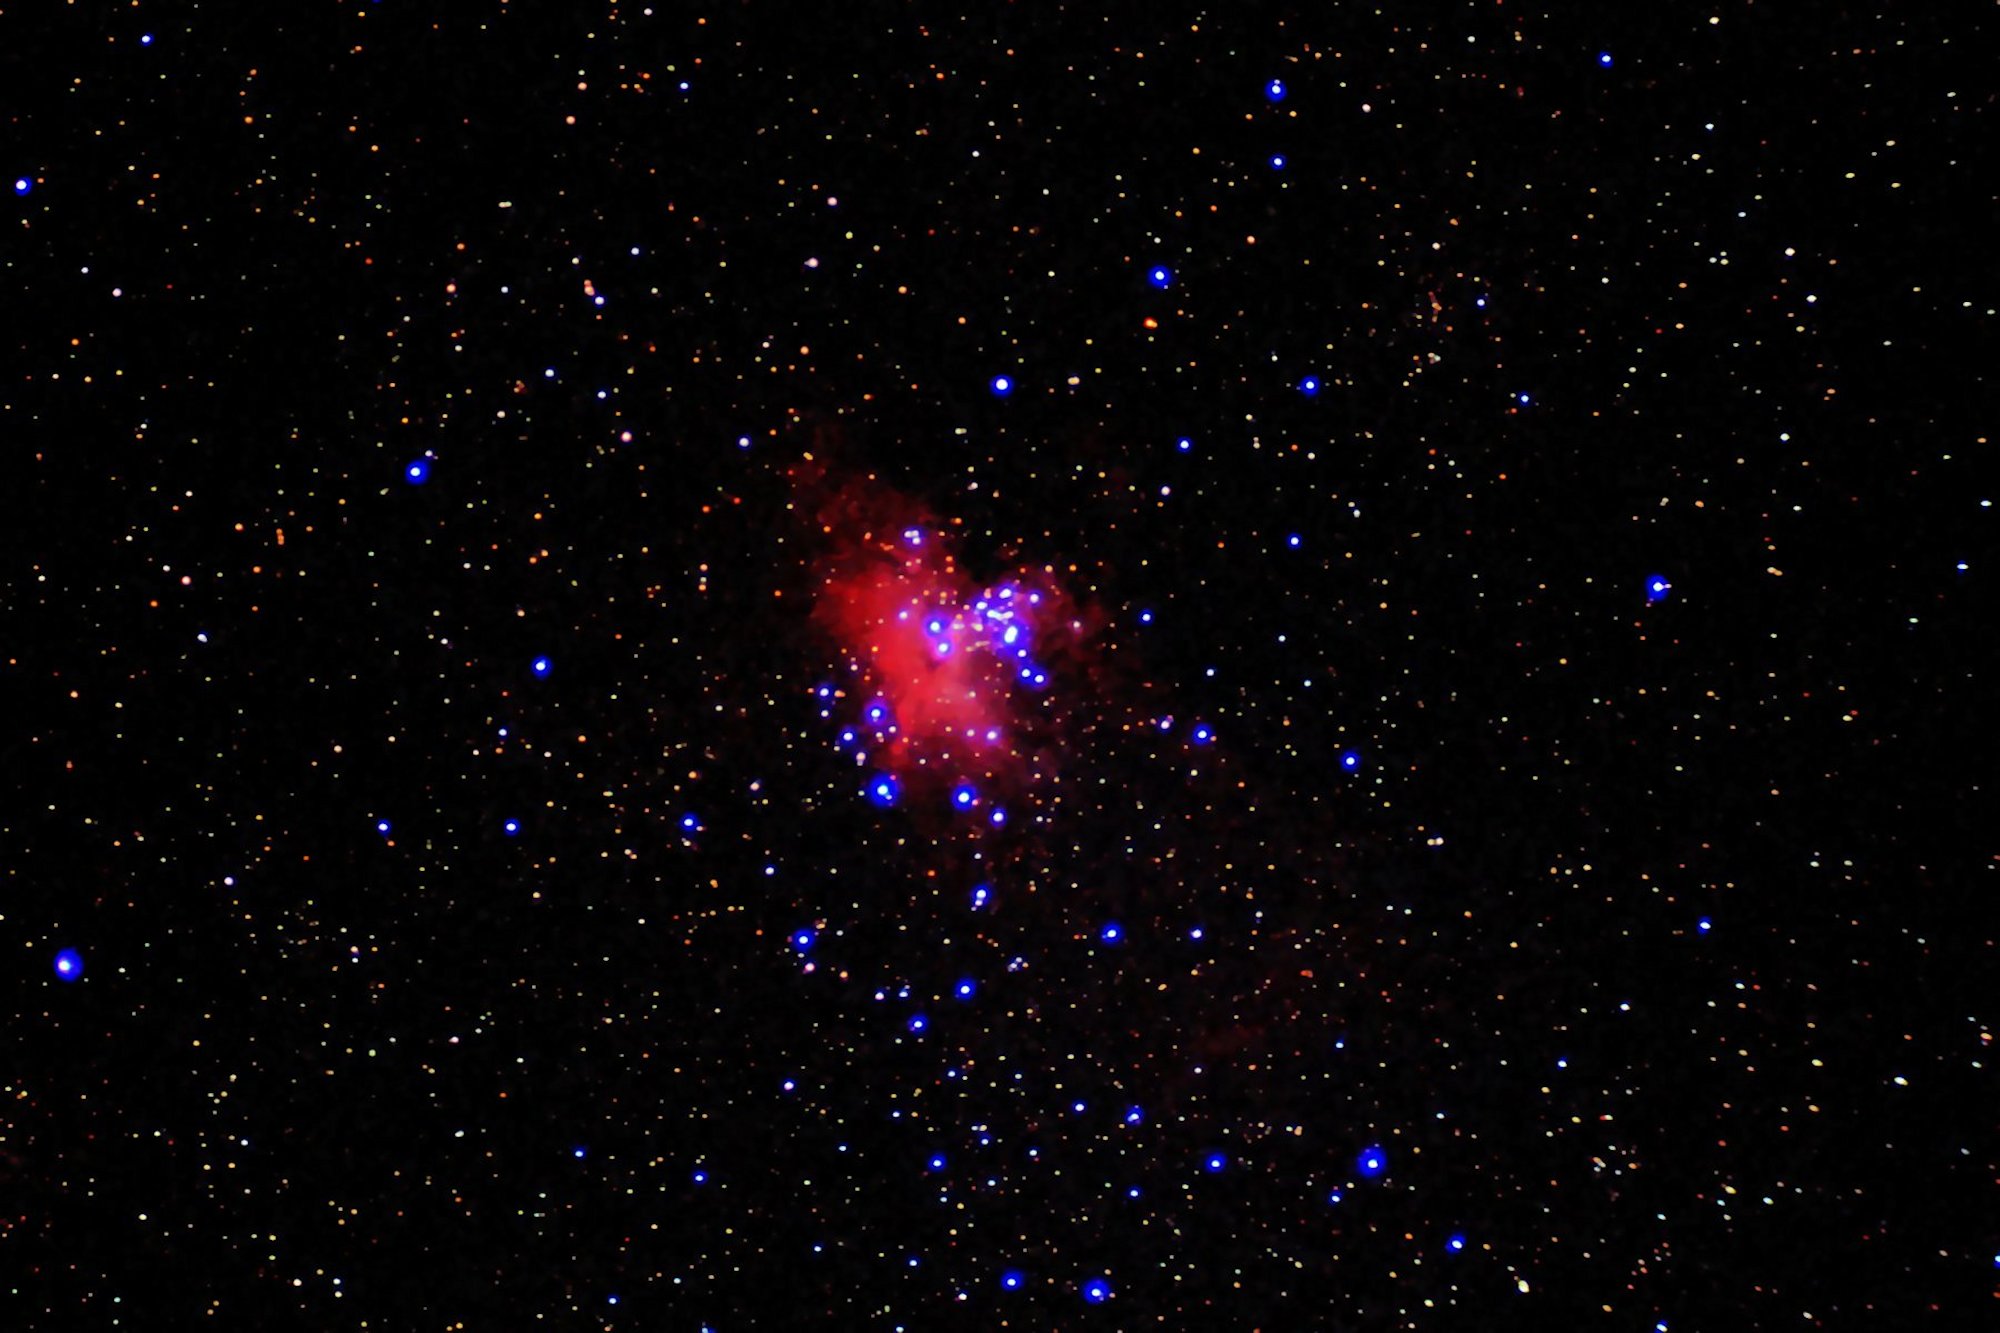 M16 The Eagle Nebula, @ 241Sec Exp At ISO 1600, 5,500 Ly from Earth